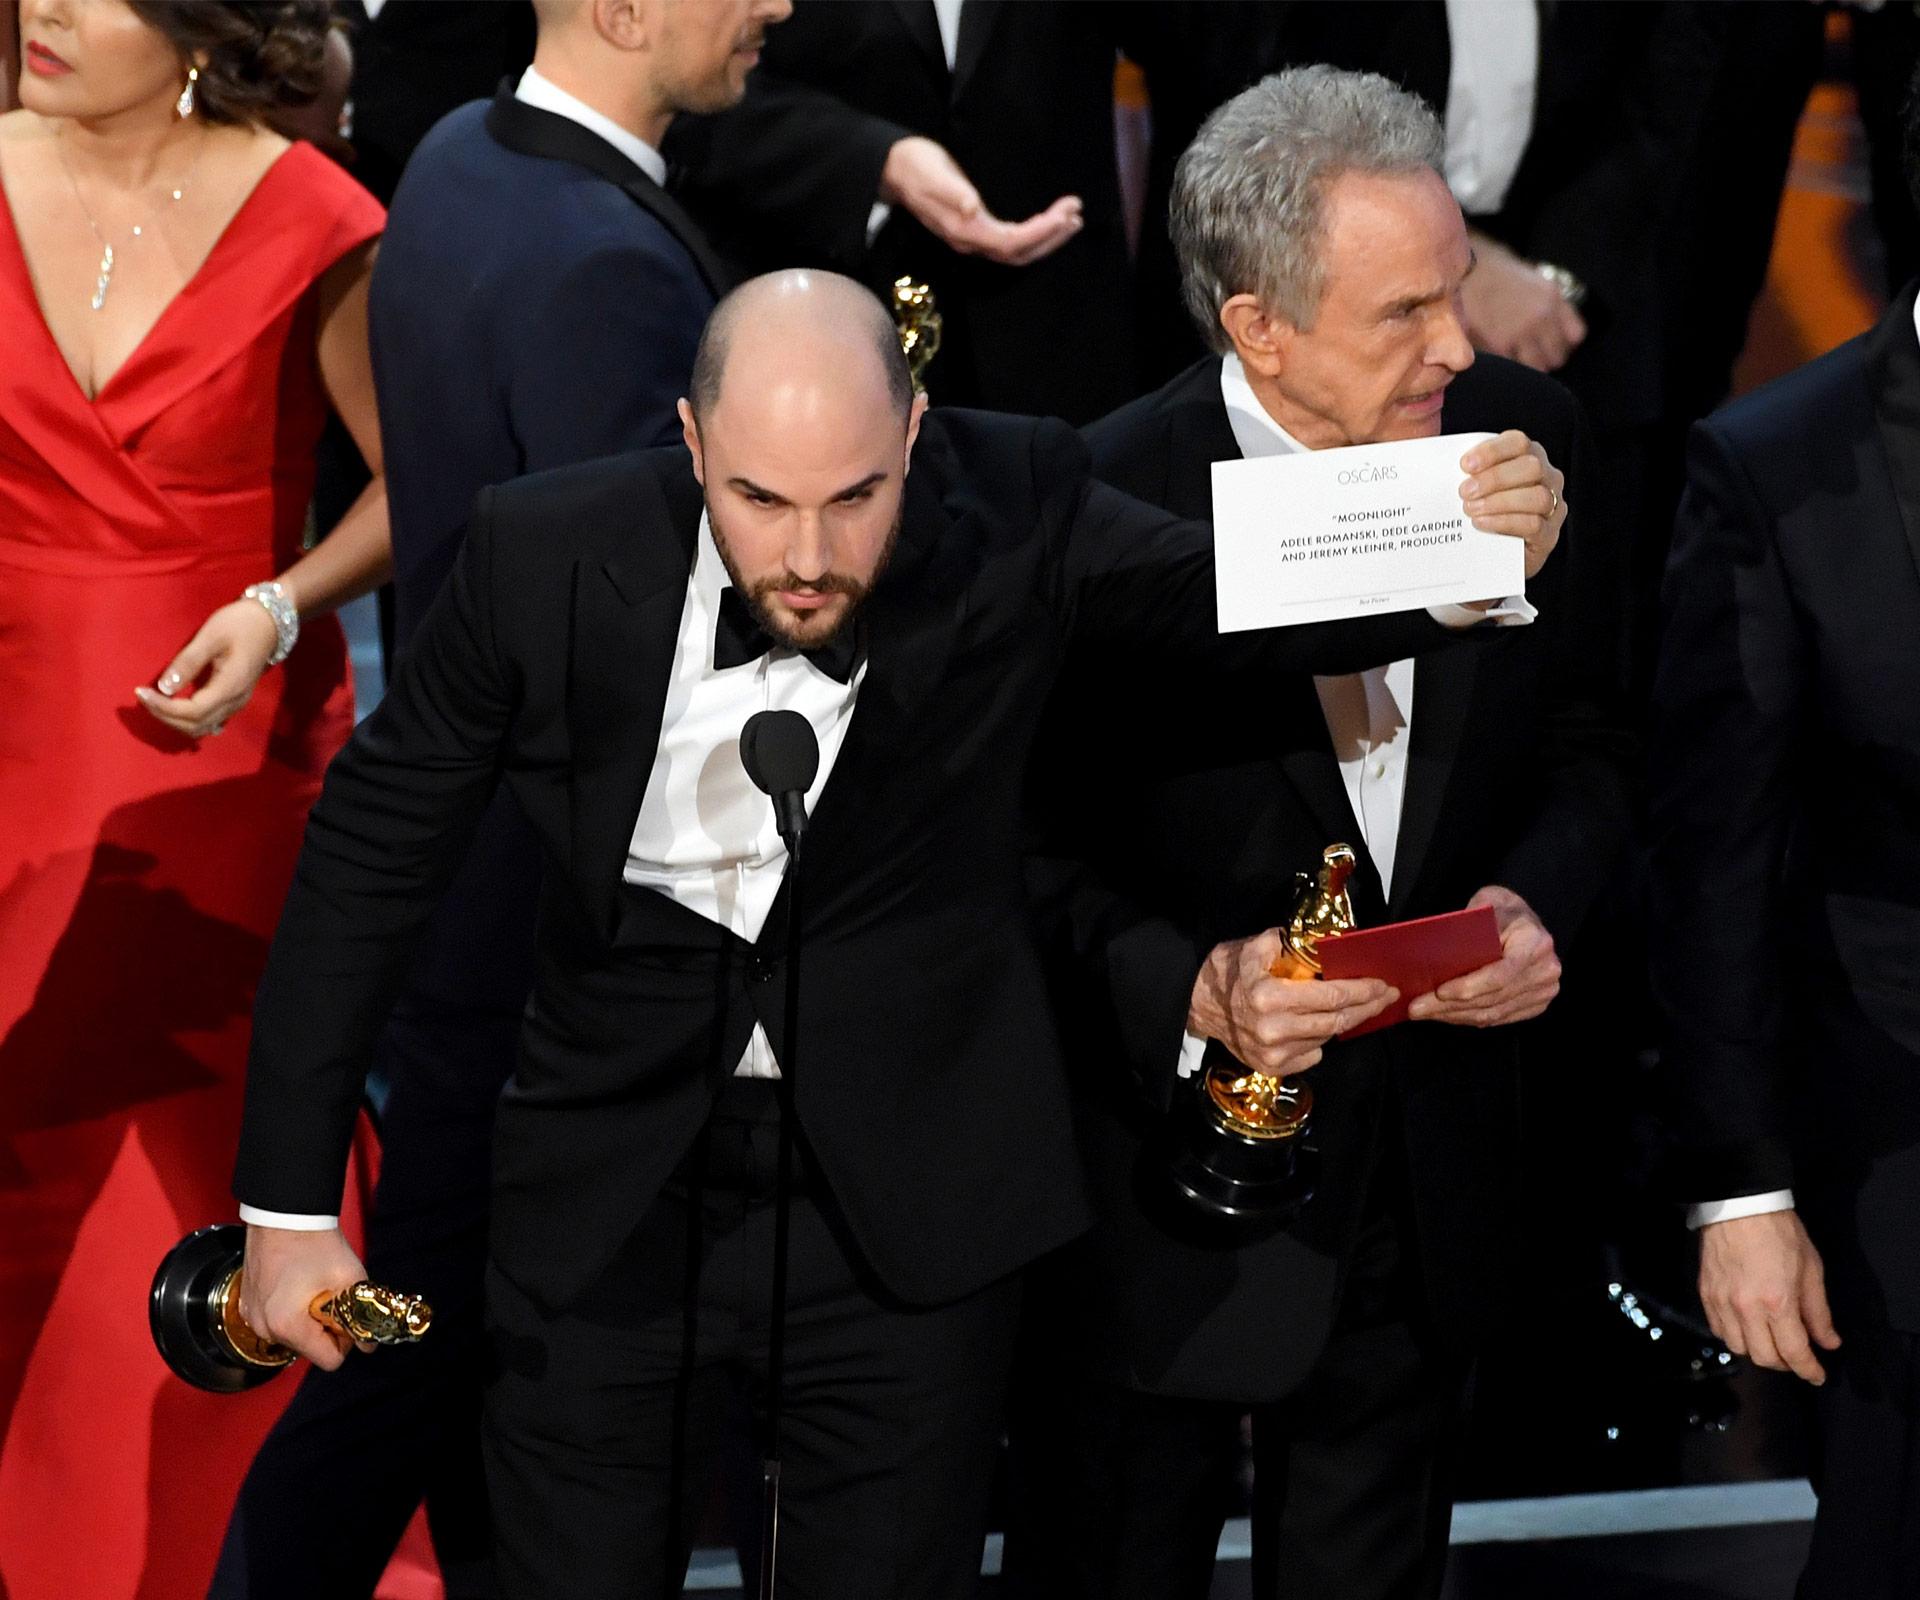 Major Oscar controversy as wrong film awarded Best Picture by mistake